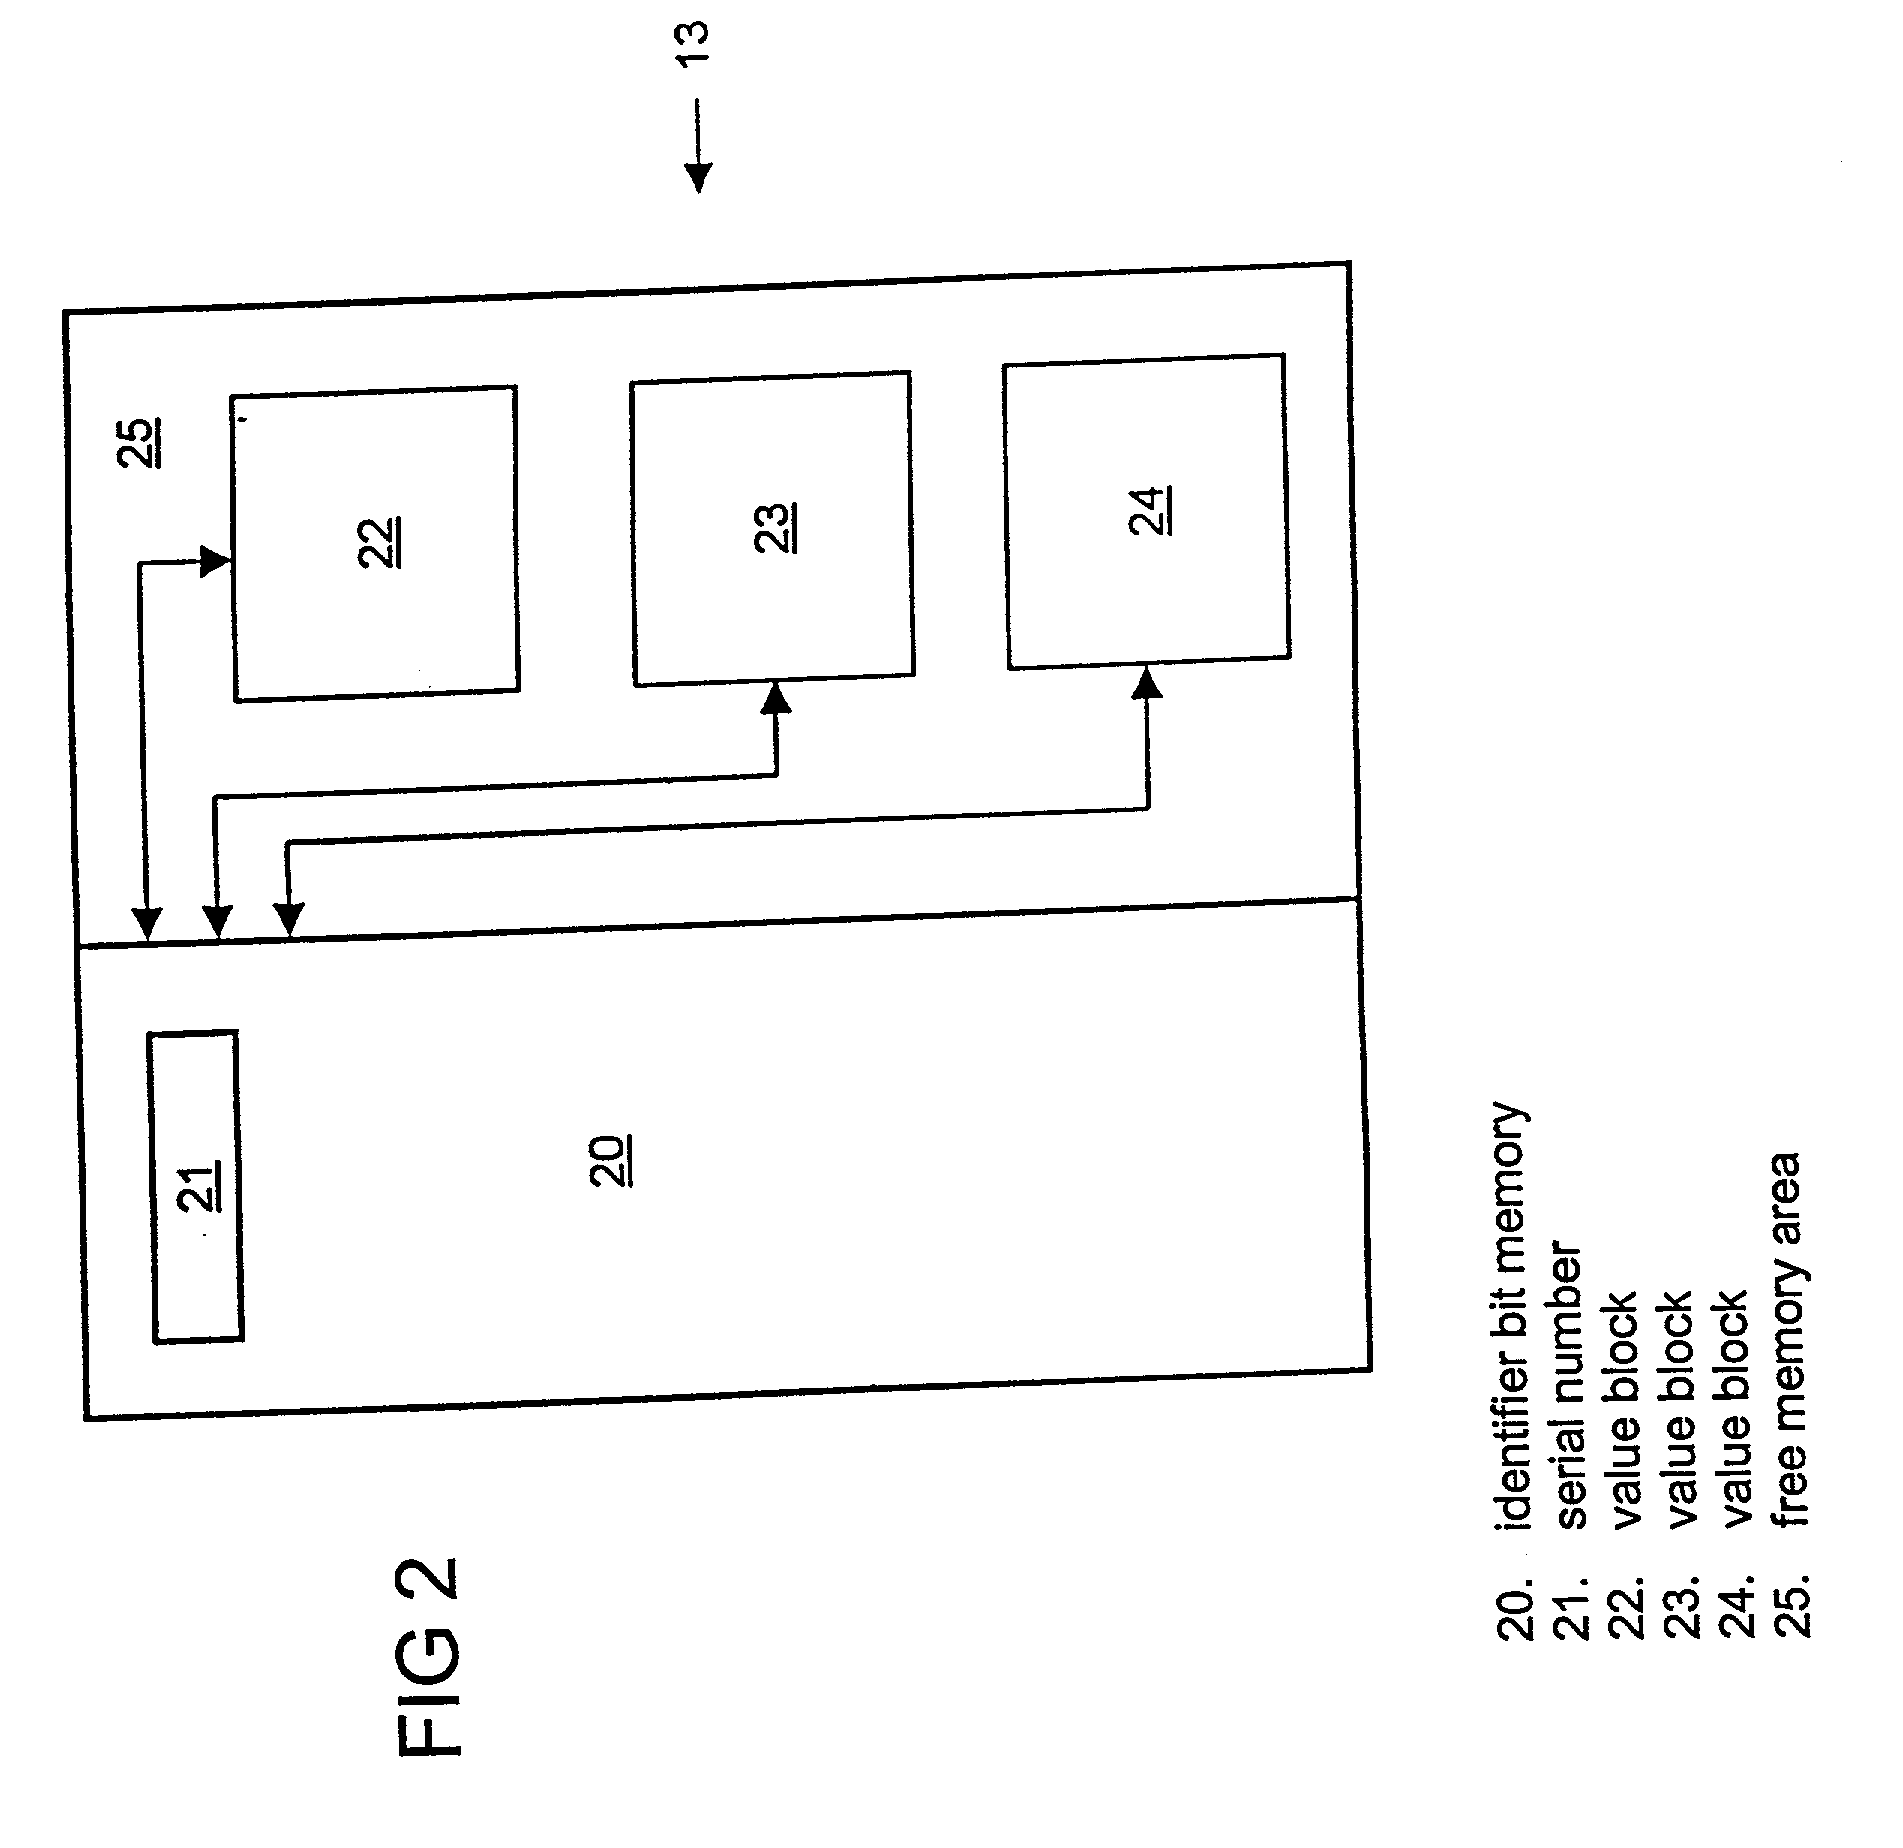 Electronic device for providing software protection